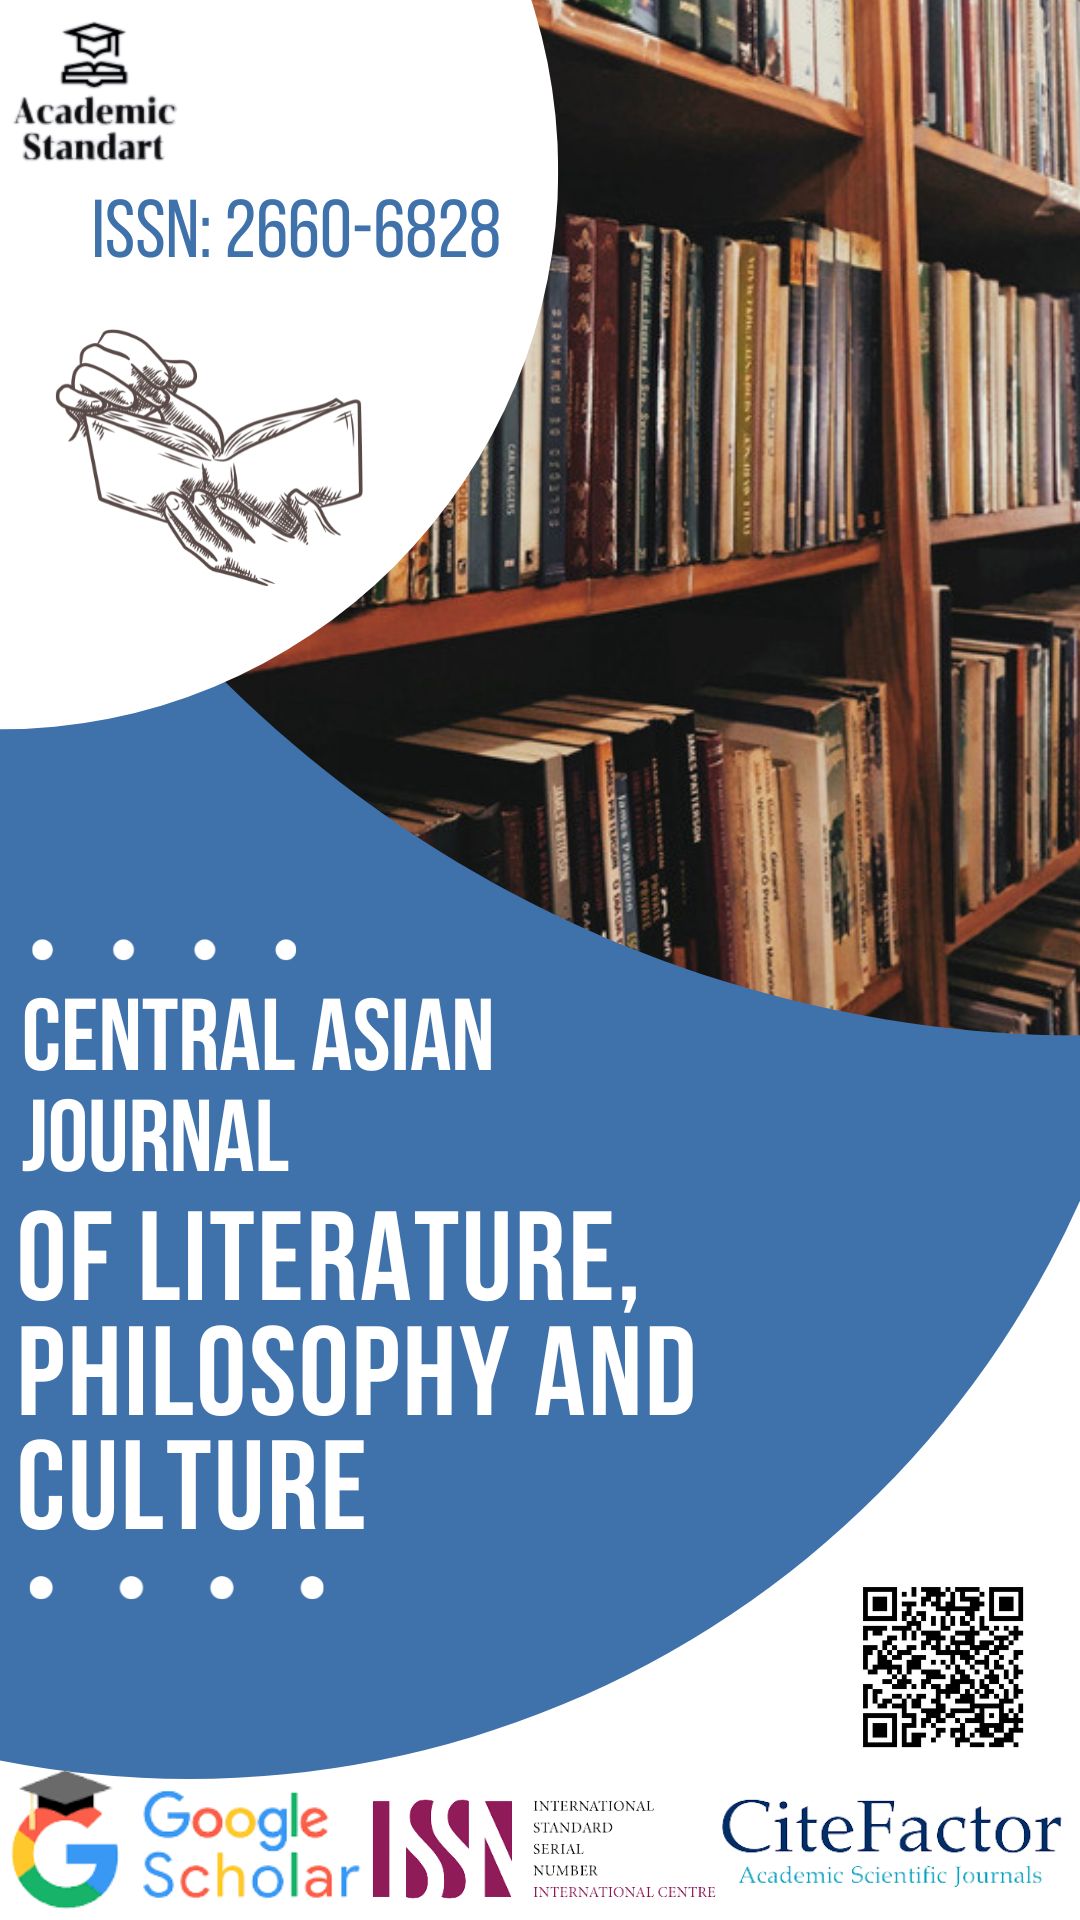 Central Asian Journal of Literature, Philosophy and Culture